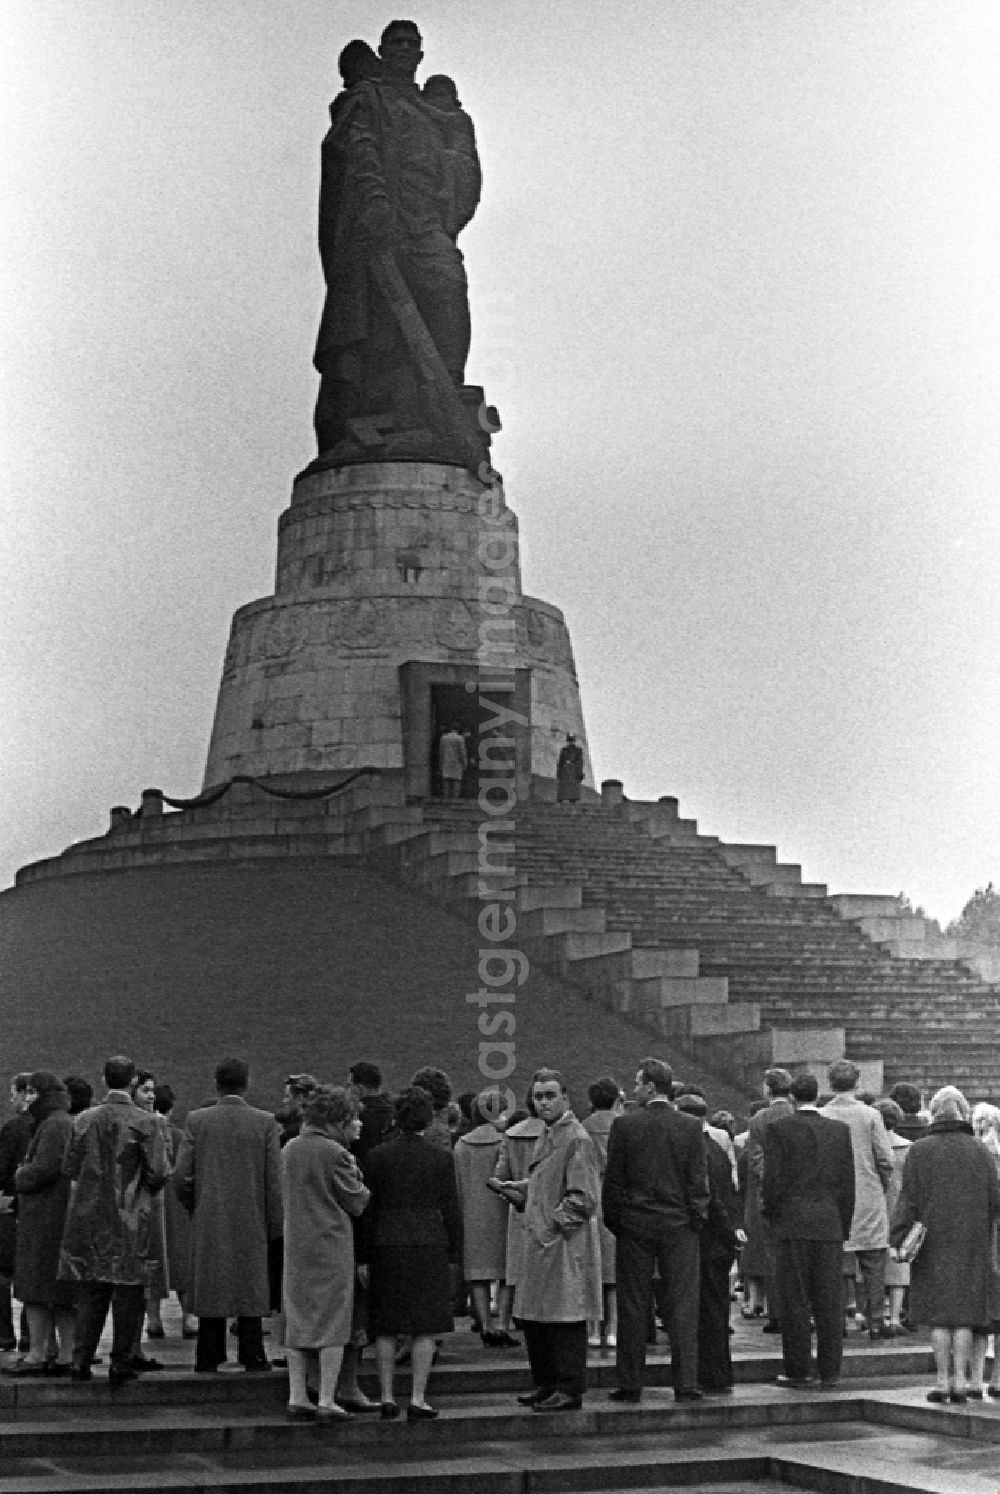 GDR picture archive: Berlin - People commemorate liberation day at the soviet memorial in Treptow Park in Berlin Eastberlin on the territory of the former GDR, German Democratic Republic